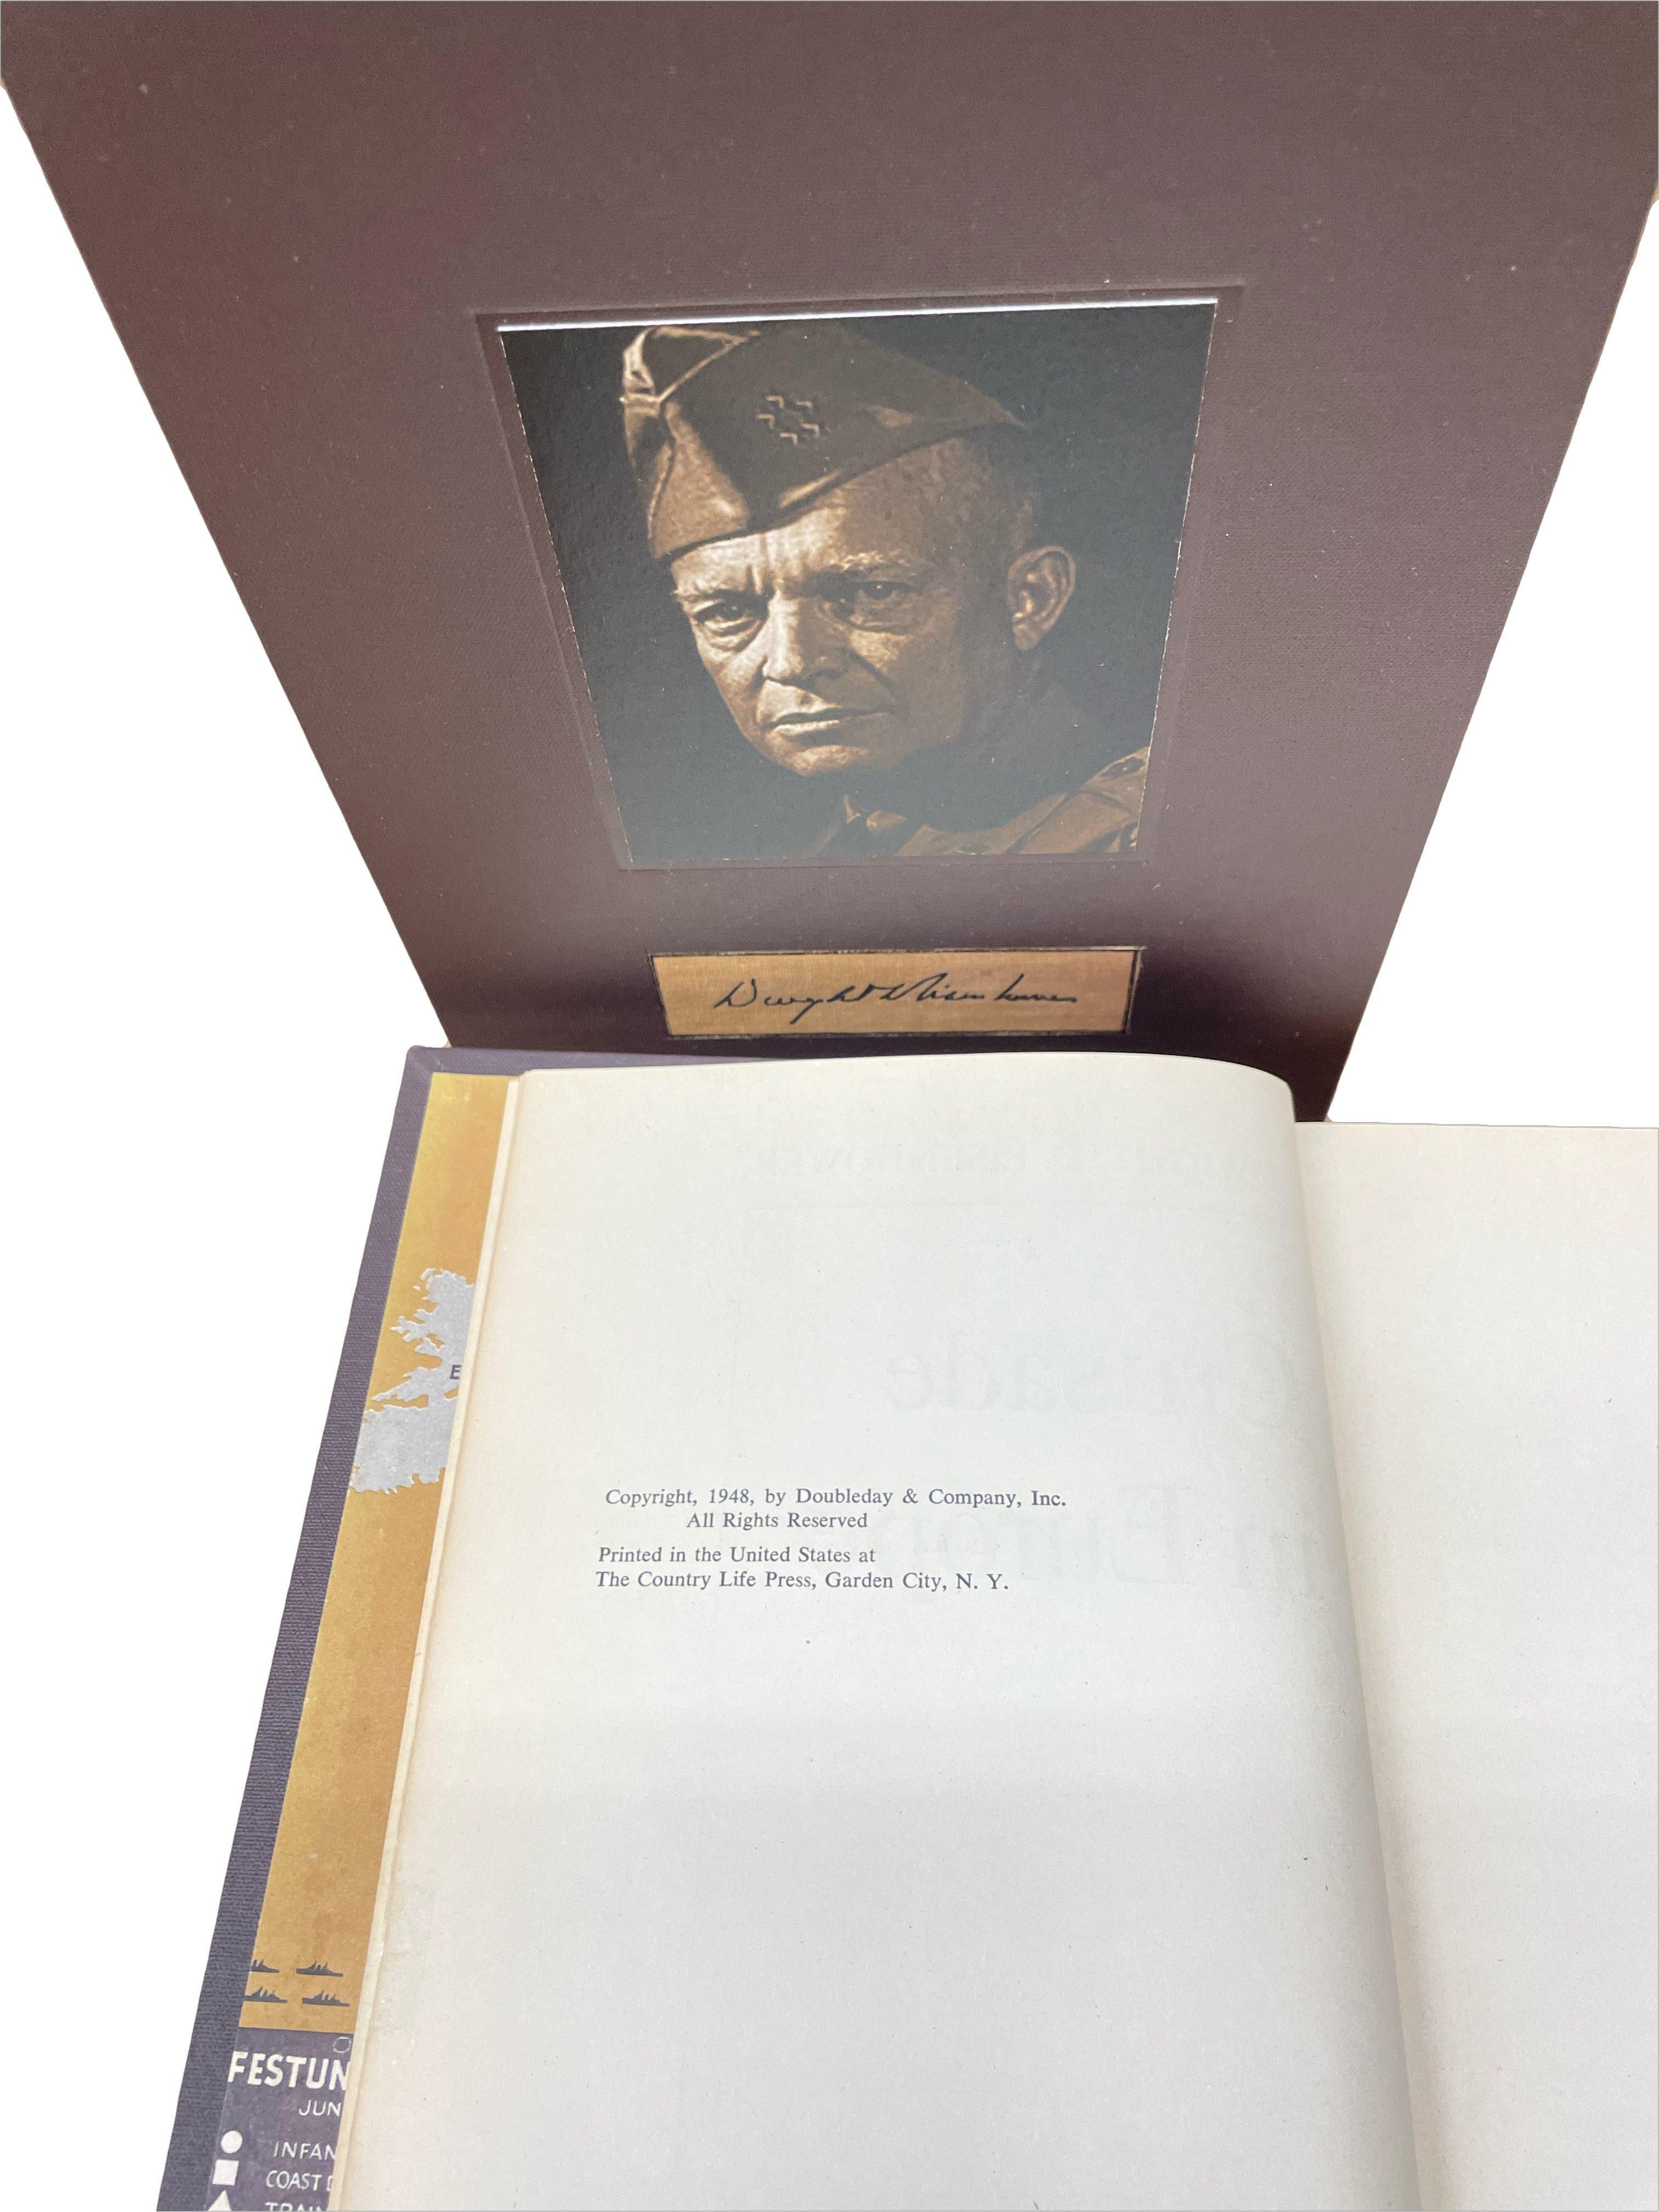 Eisenhower, Dwight D. Crusade in Europe. Garden City: Doubleday & Company, Inc., 1948. First edition. Signed and Inscribed by Eisenhower to Charles Helms on half title page. Octavo, in new quarter leather and cloth binding, with gilt titles and